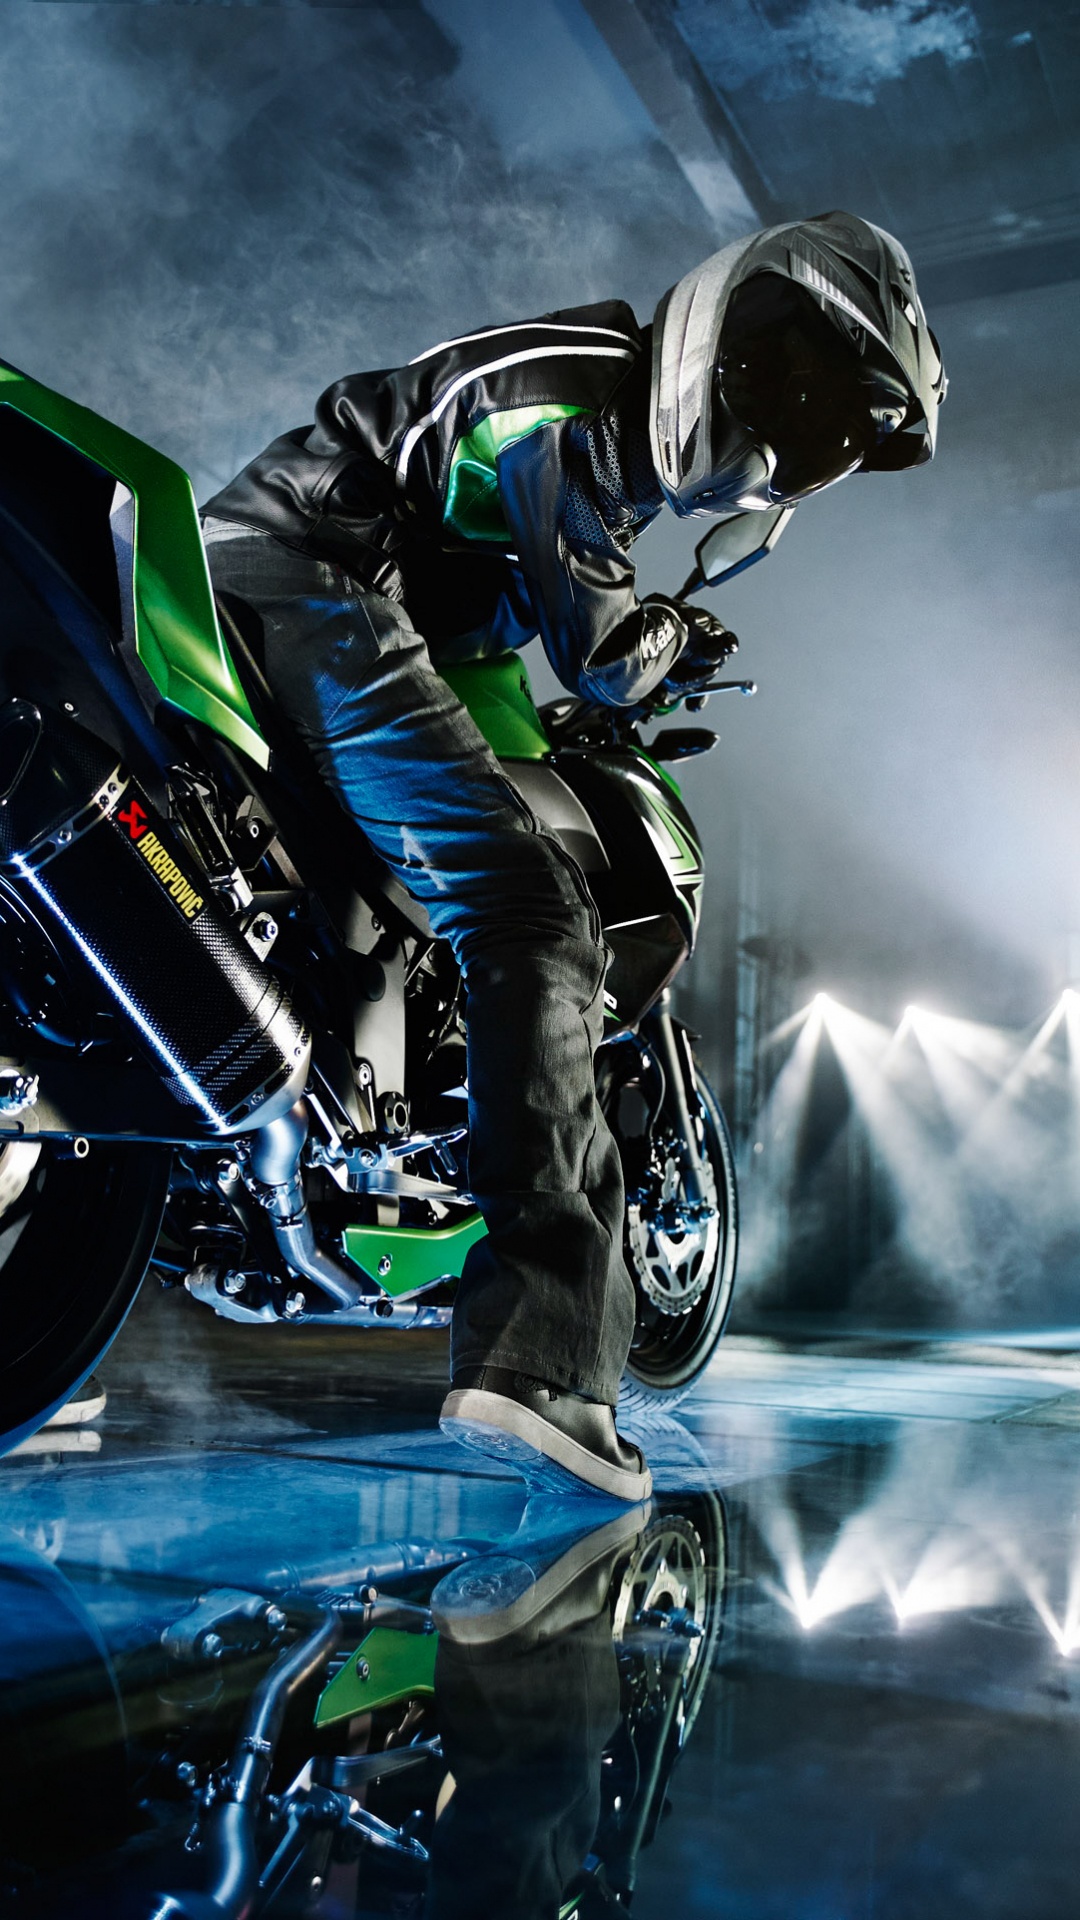 Kawasaki Z H2 unvelied – a new “Super charged Hypernaked” genre is born |  IAMABIKER - Everything Motorcycle!